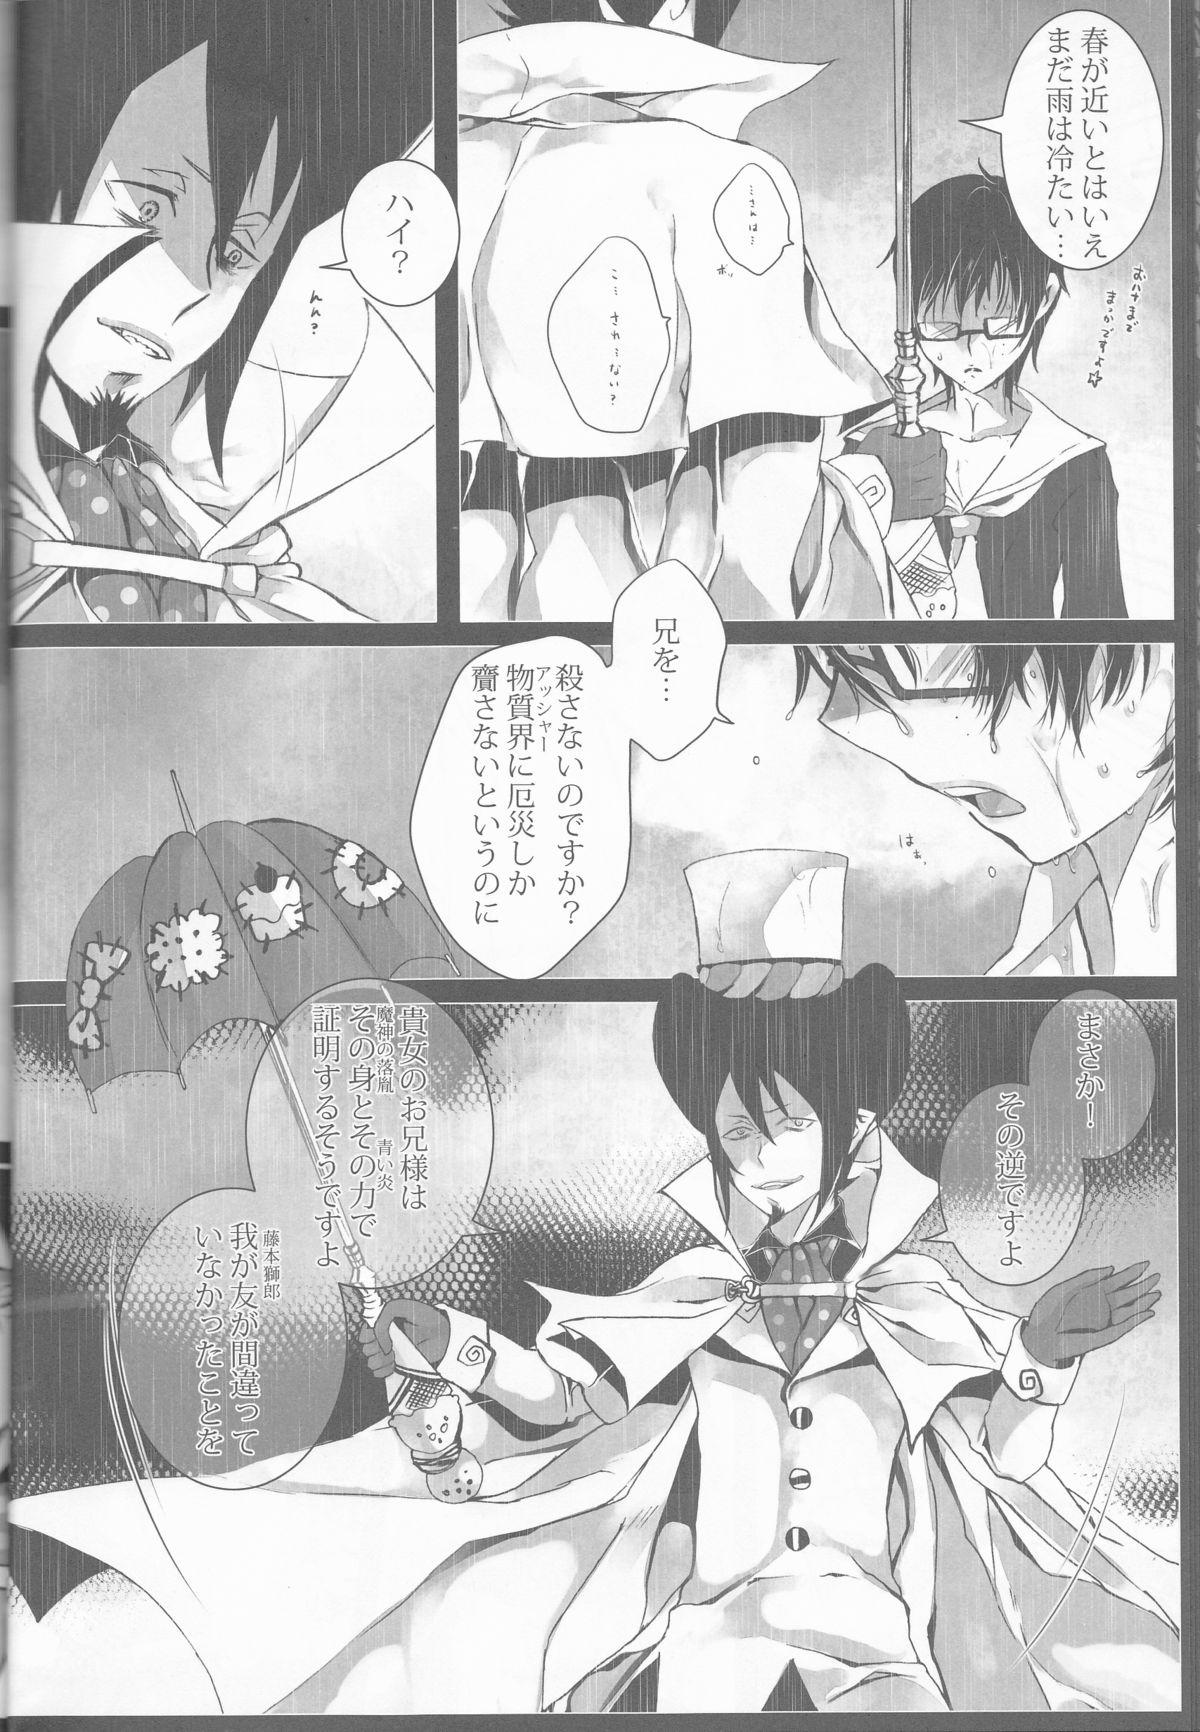 4some Exodus 2 - Ao no exorcist Stud - Page 11